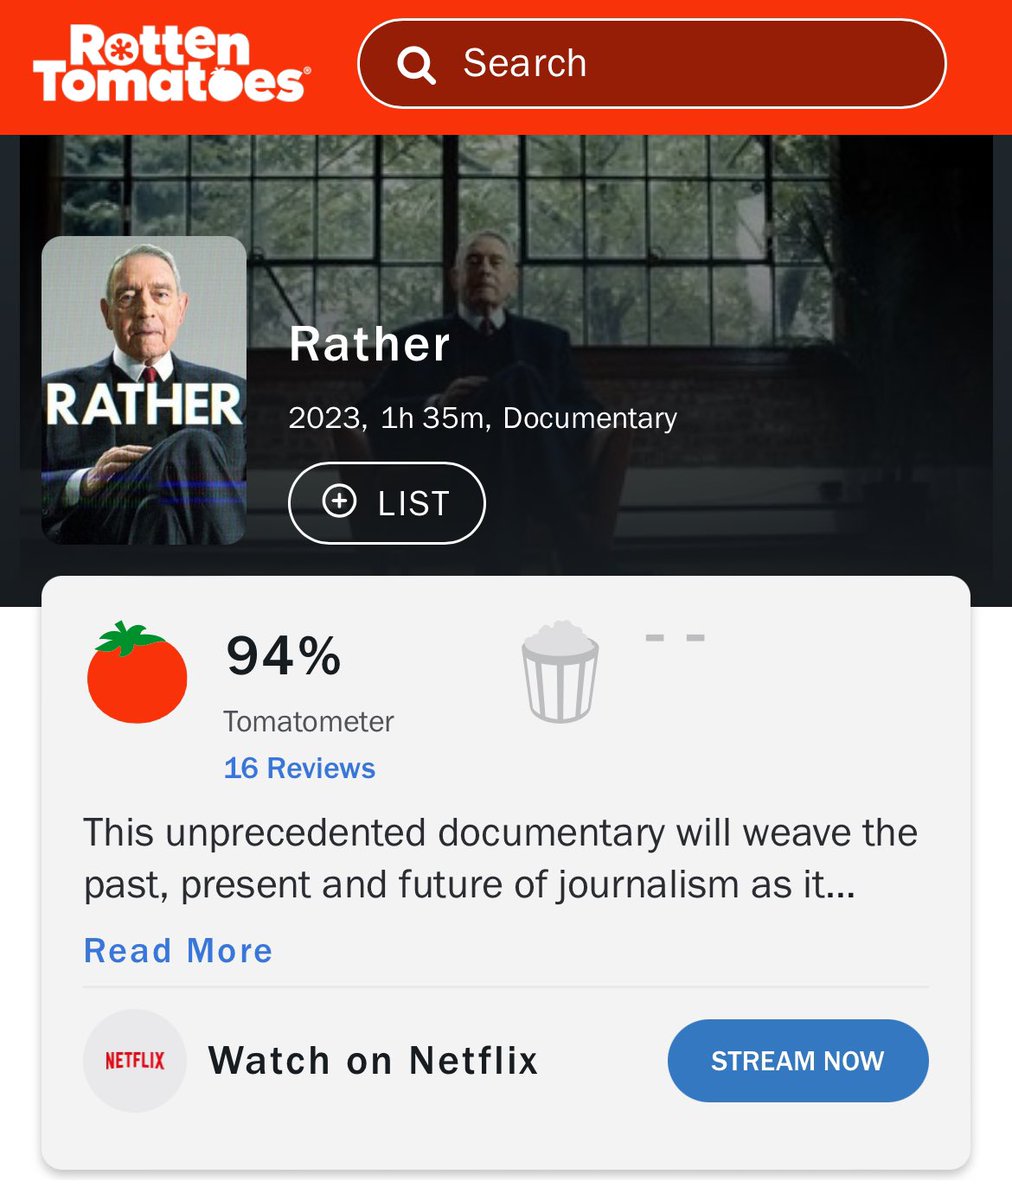 This just in: RATHER has an impressive 94% fresh rating on @RottenTomatoes Have you watch on @netflix yet?